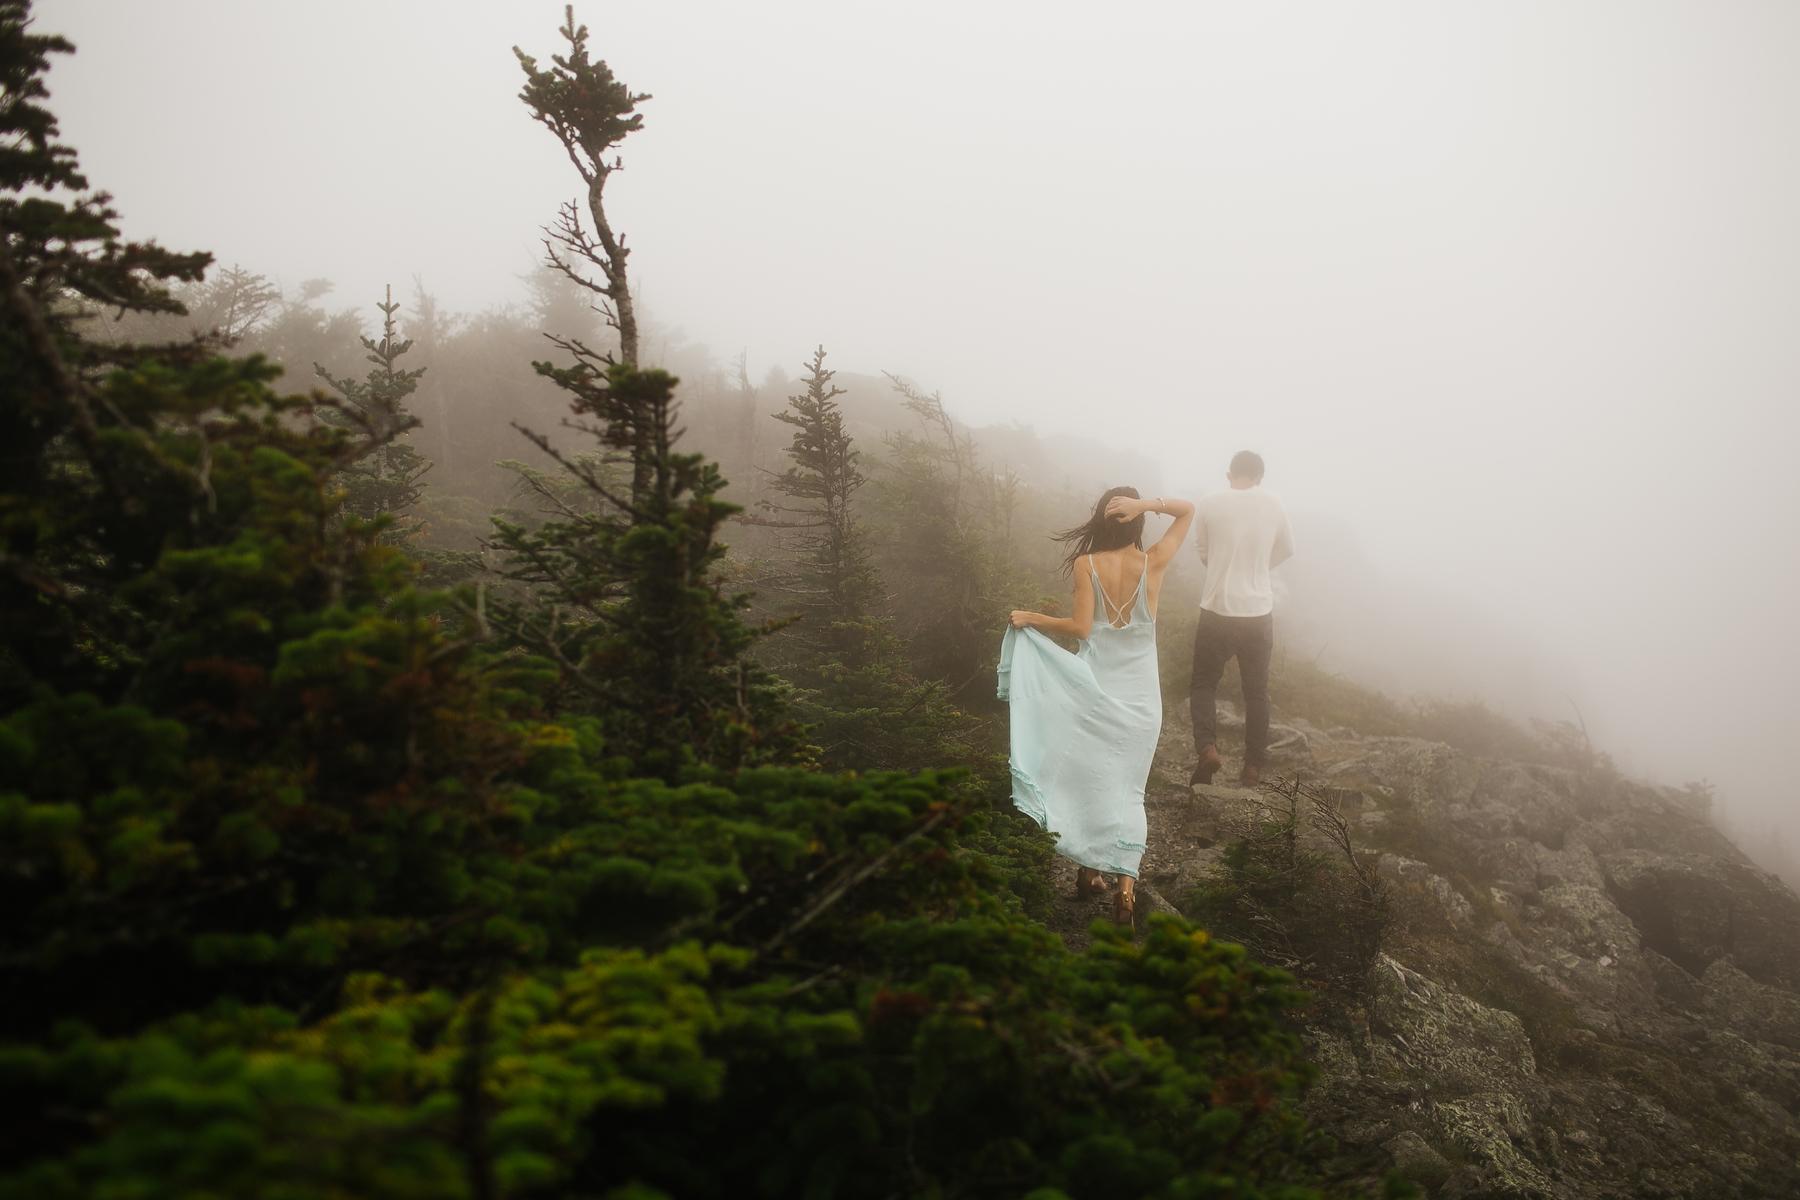 Couple walking on a path in the fog on Mt. Mansfield near Stowe, Vermont.